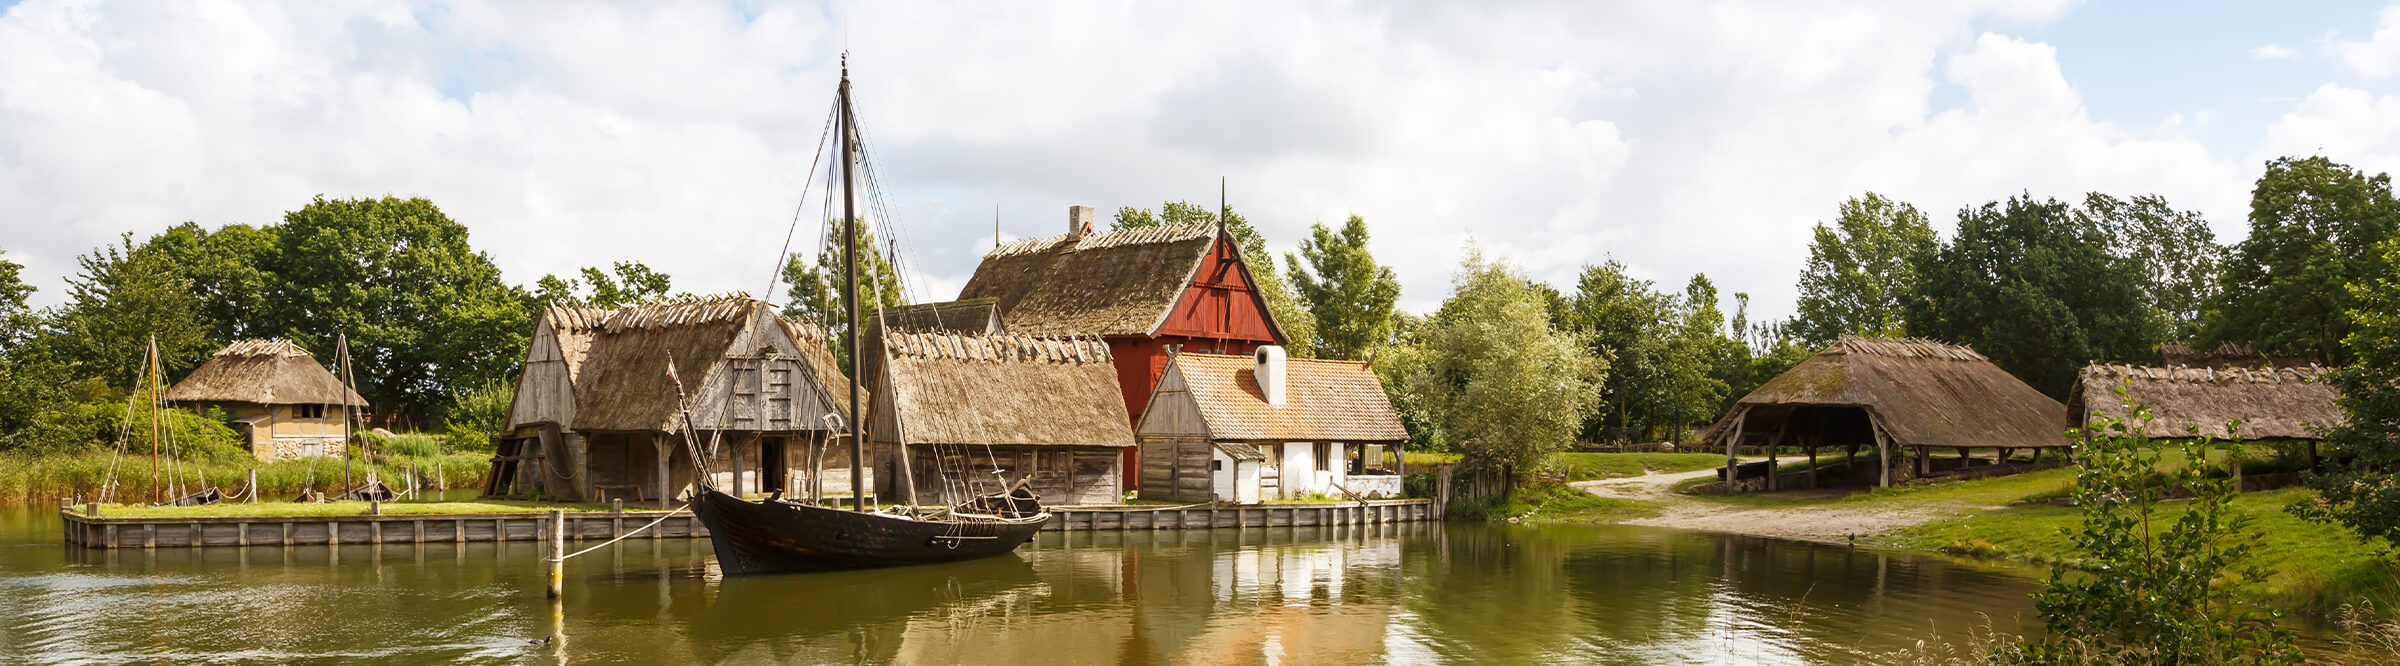 The medieval houses and boats in The Middle Ages Center, the experimental living history museum in Sundby Lolland, Denmark.